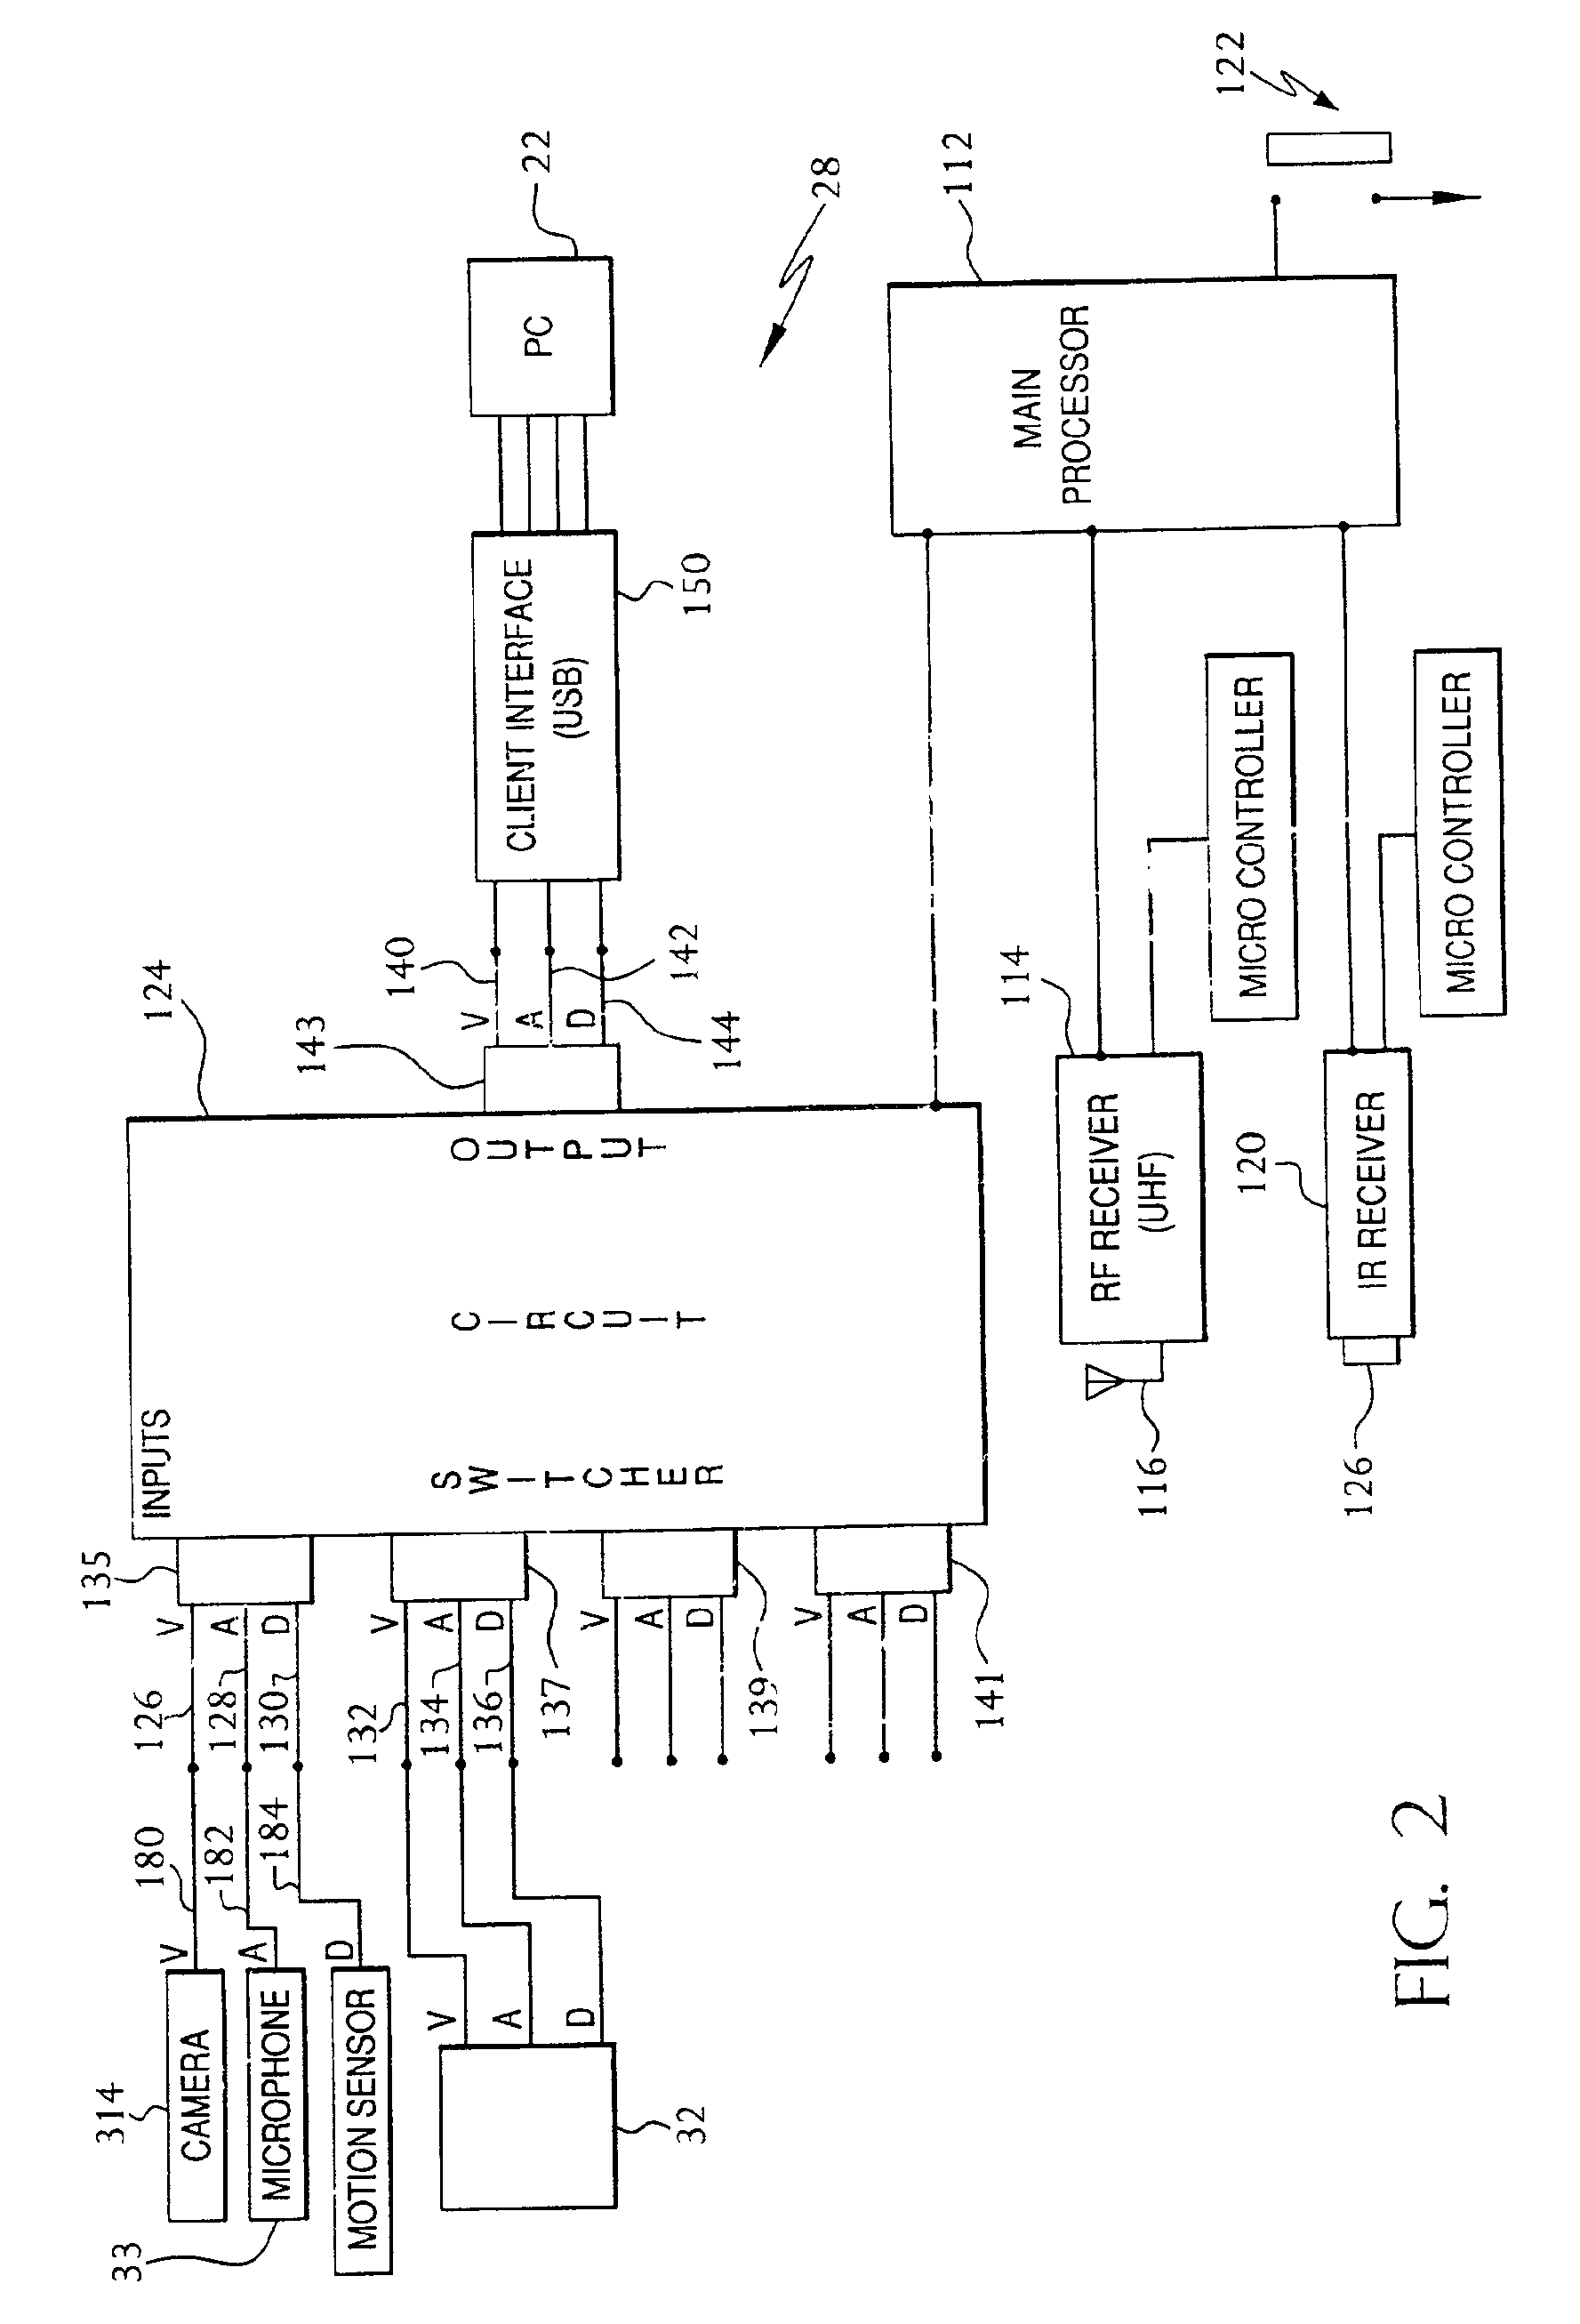 Method and system for communicating with a wireless device